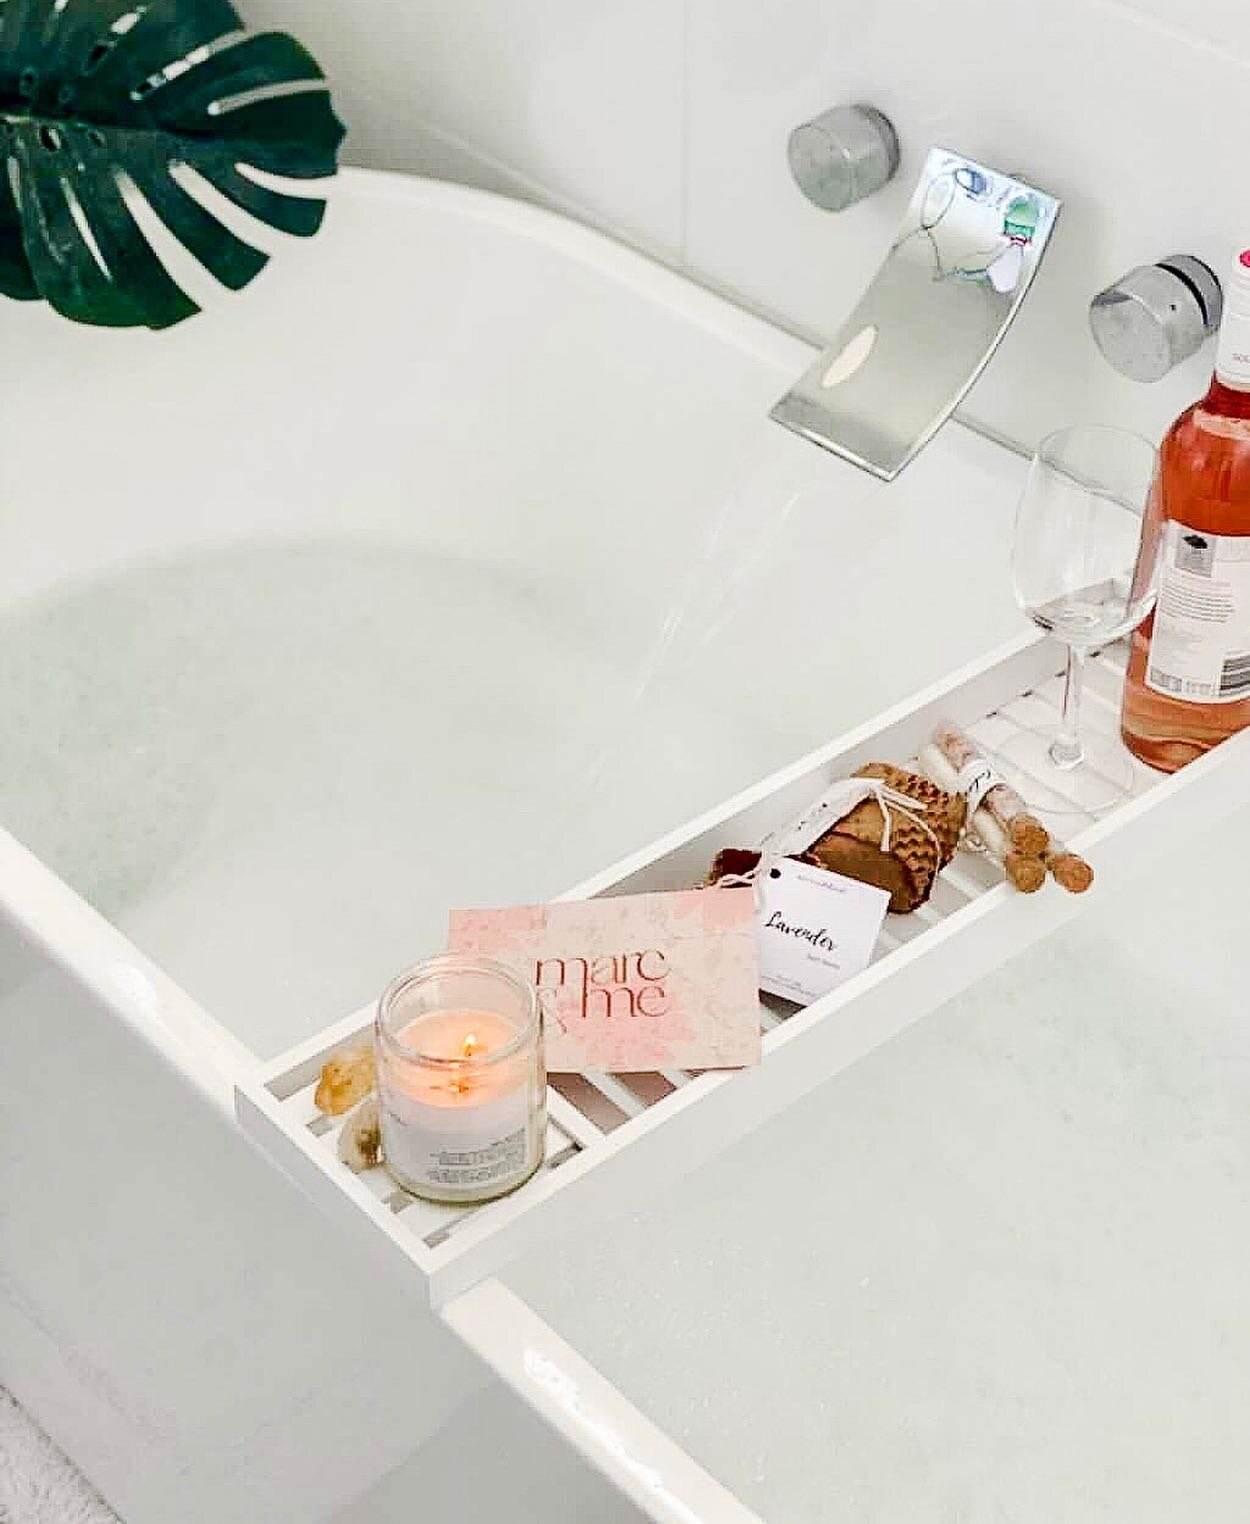 ✨@lazzzzybonez Treating herself to Our Self-care products. 🧖🏽&zwj;♀️

✨You can treat yourself too, all you have to do is click the link in our Bio and shop our Go get scrubbed Self-care section. 🛁🛍

#selfcare #selfcareroutine #bathbombs #bathbomb